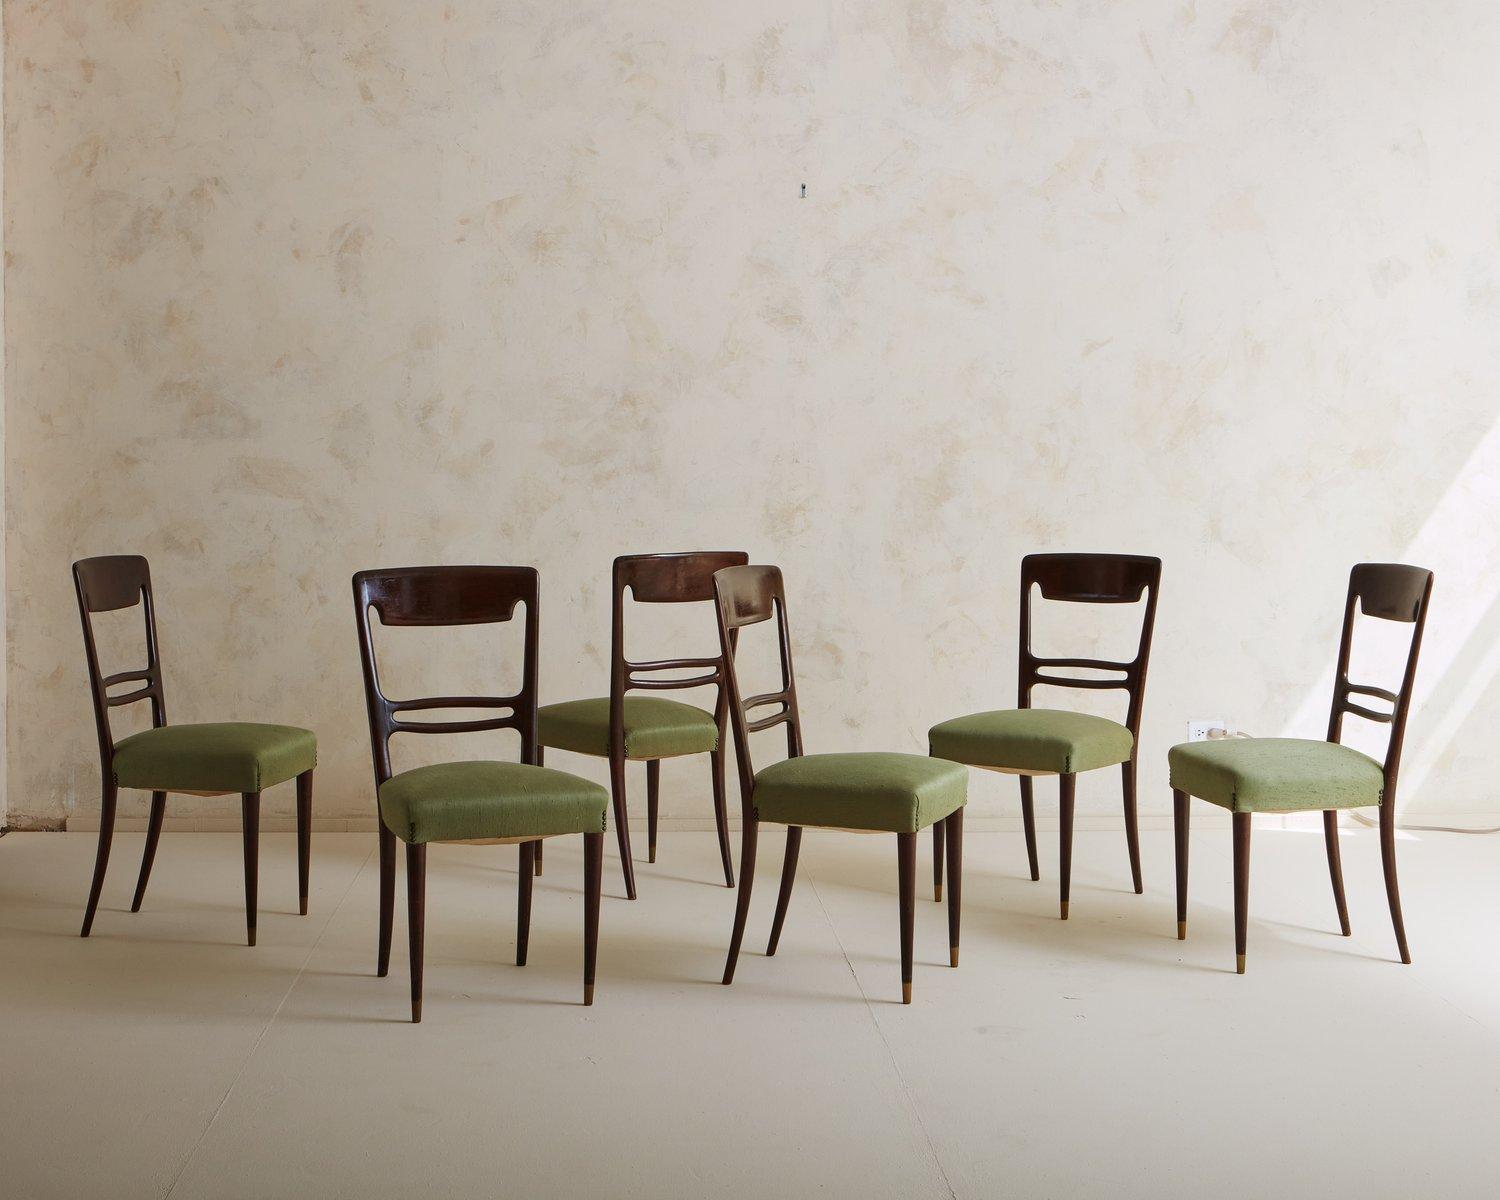 A set of 6 vintage dining chairs featuring elegant mahogany frames with tapered legs and cutout details on the seat backs. These chairs have upholstered seats and retain their original green fabric with subtle stud details. Sourced in France, 20th